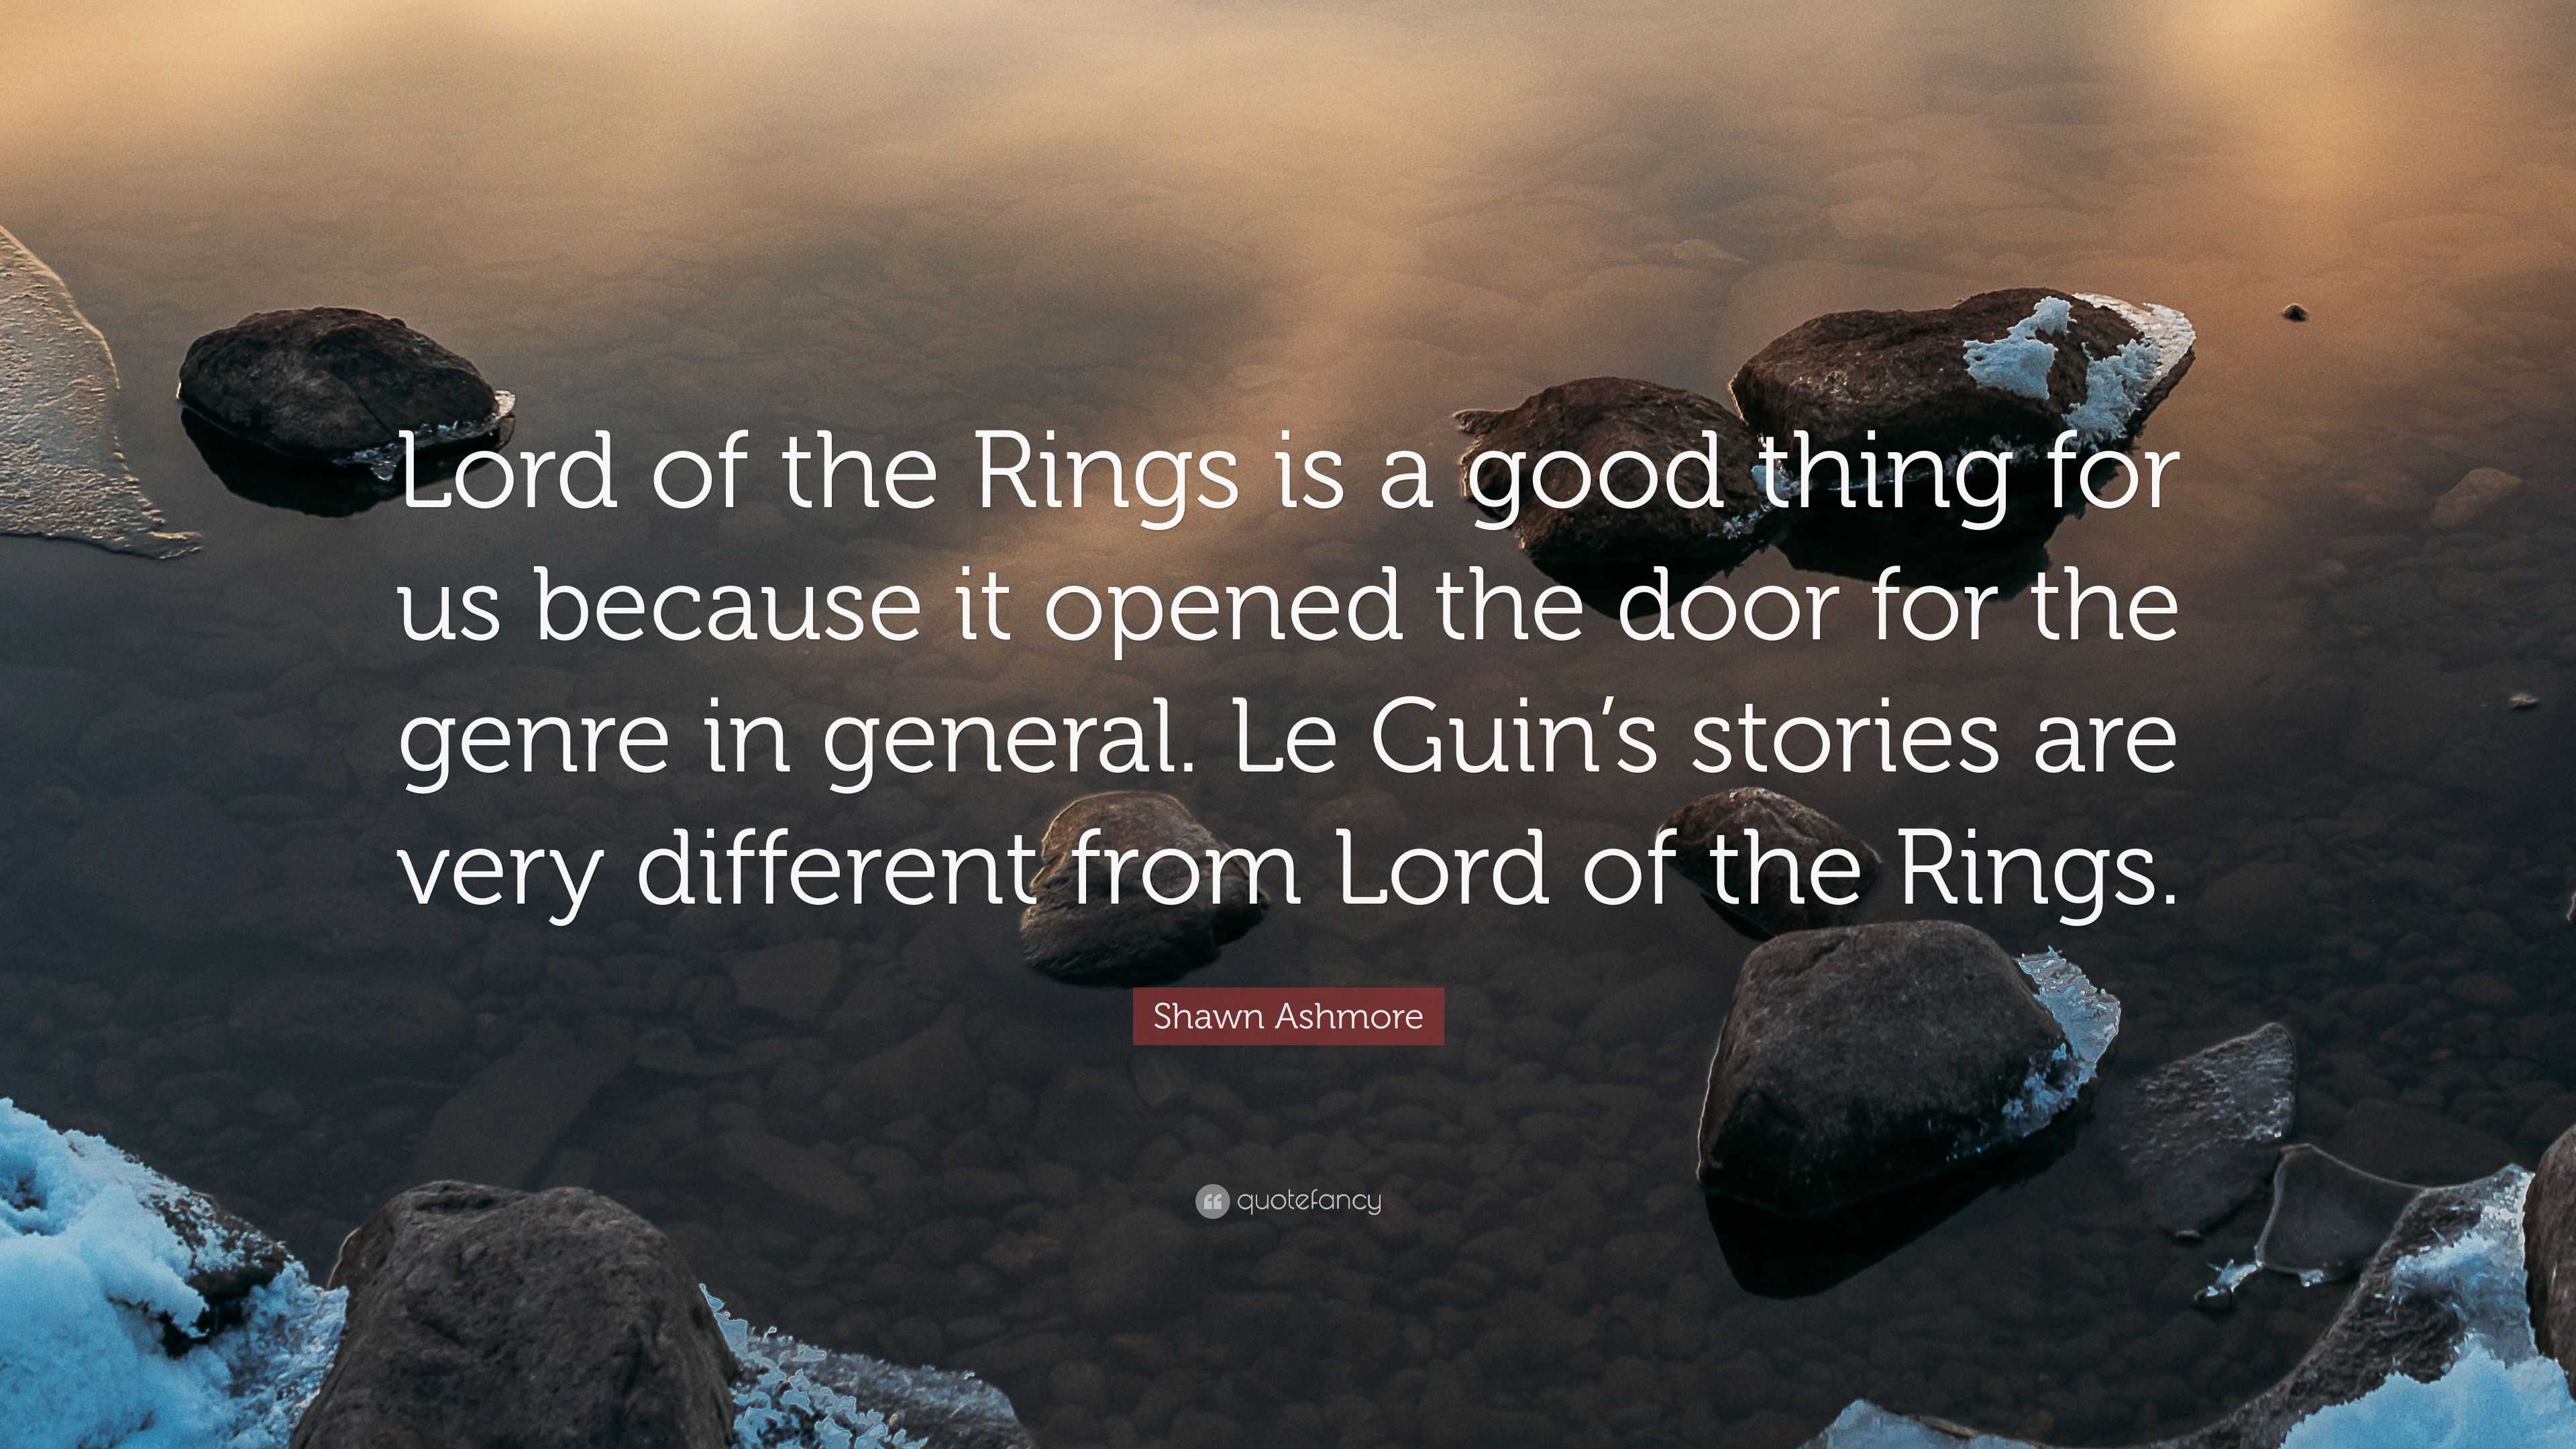 The Lord of the Rings: Return to Moria is a story heavy take on drunken  dwarven exploration and crafting - Epic Games Store